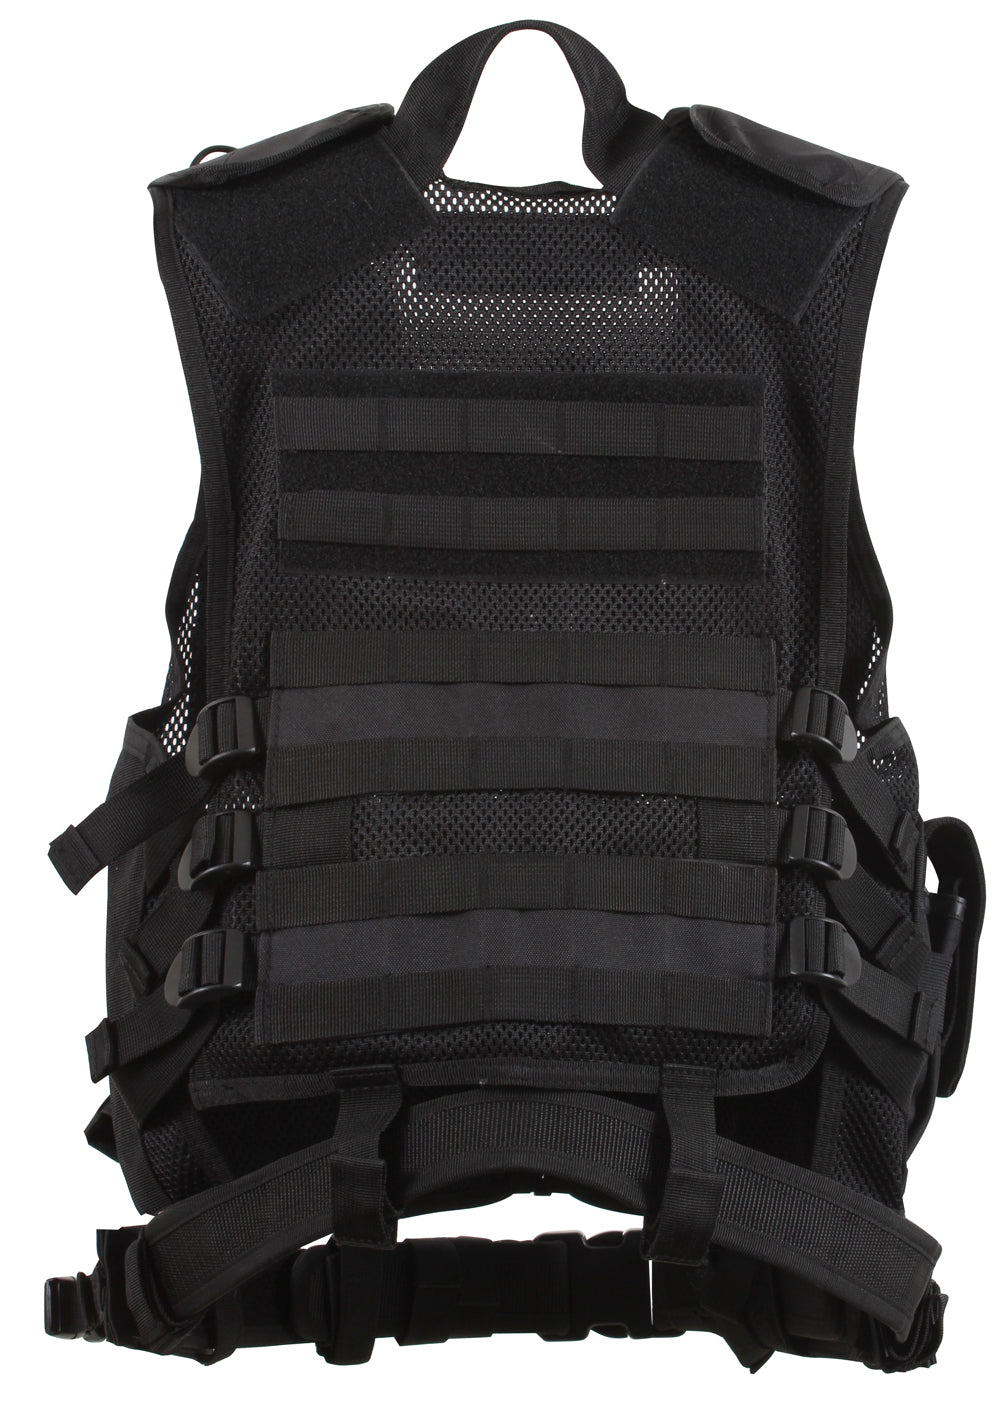 Rothco Cross Draw MOLLE Tactical Vest Black - Final Sale Ships Same Day